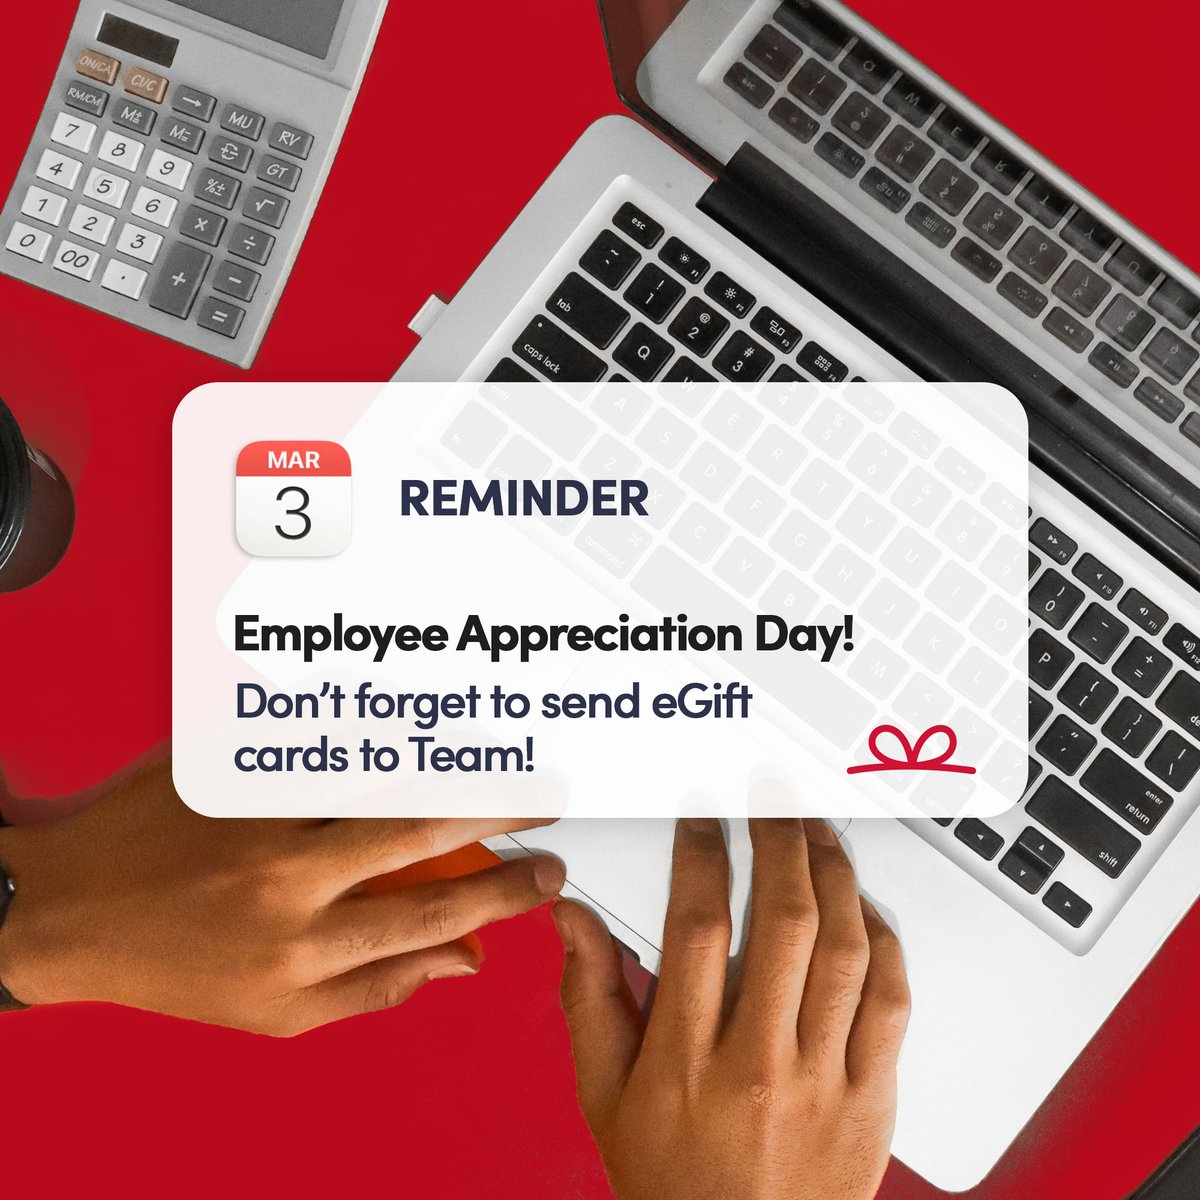 #EmployeeAppreciationDay is here! There is still time for a thoughtful gift your team will ❤️

Shop eGifts by visiting our corporate website at giftmehub.com

#Giftmehub #employeerewards #employeeengagement #employeerewards #corporategifting  #DigitalGiftCard #egiftcard